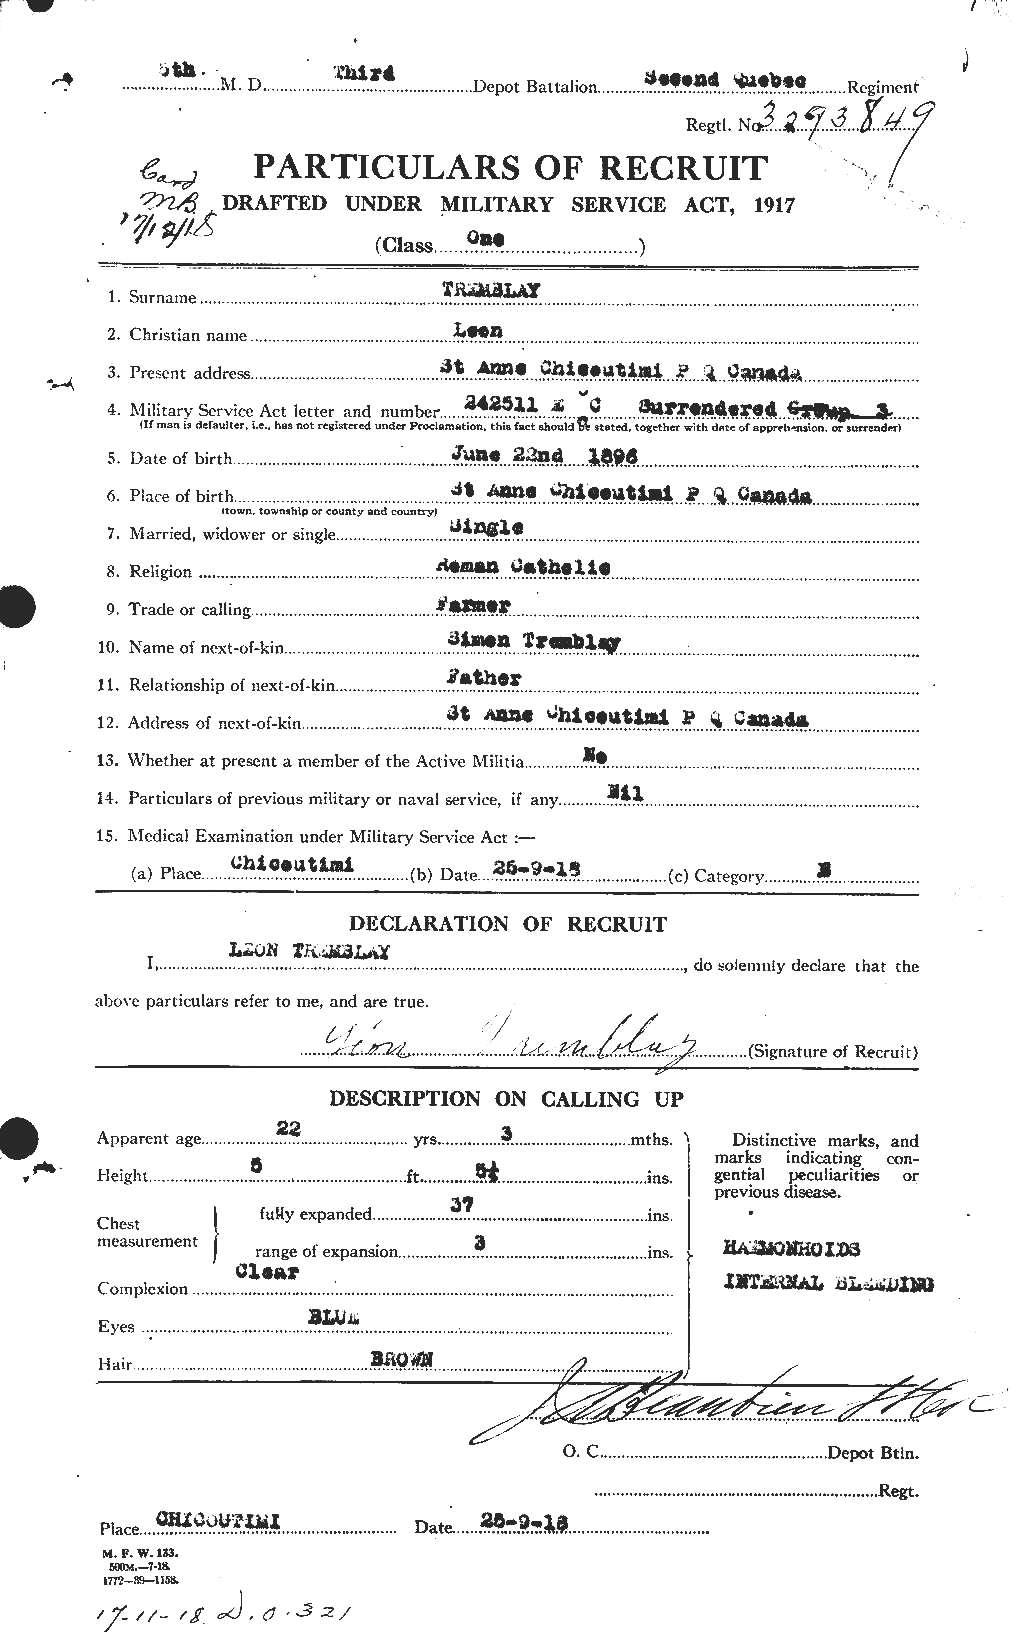 Personnel Records of the First World War - CEF 639176a